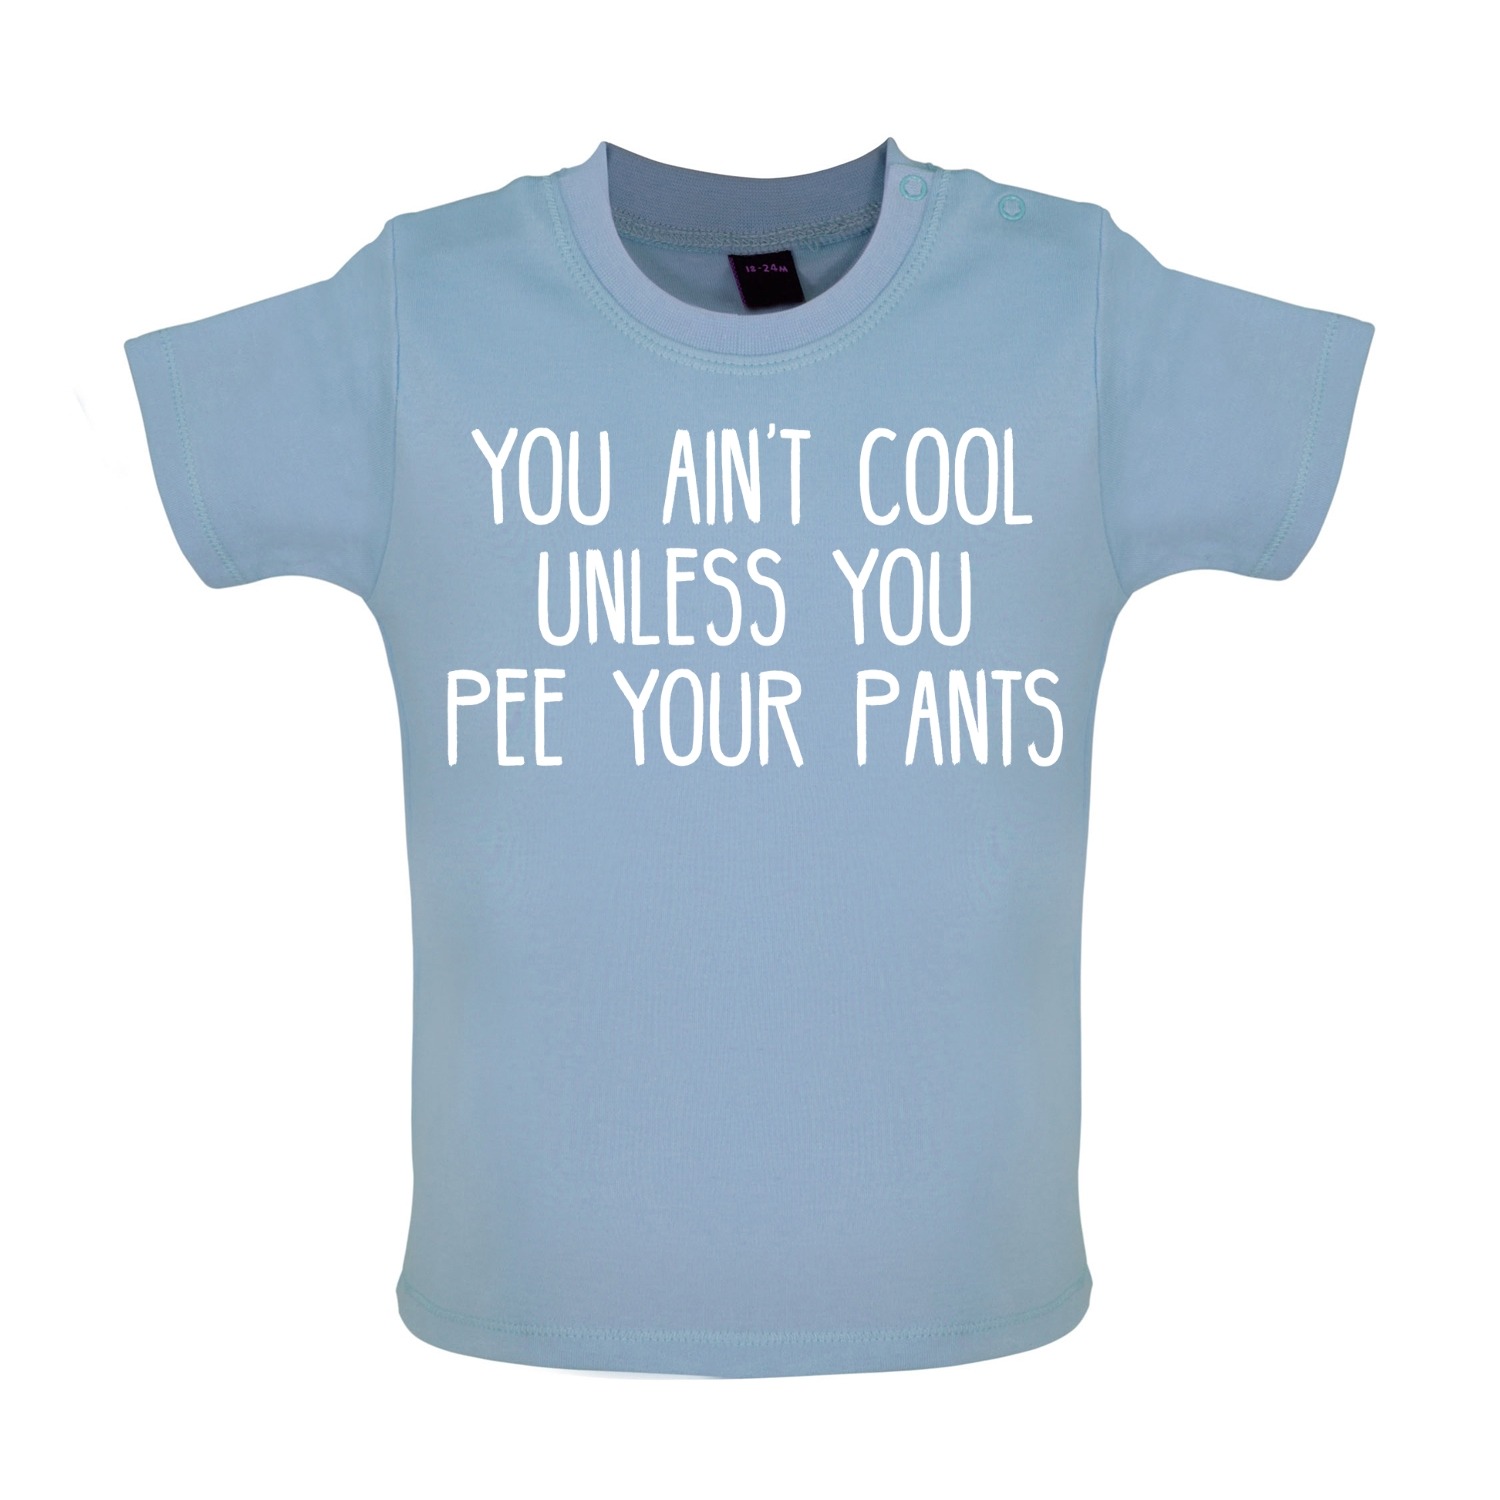 Cool pee your pants baby tshirt blue.